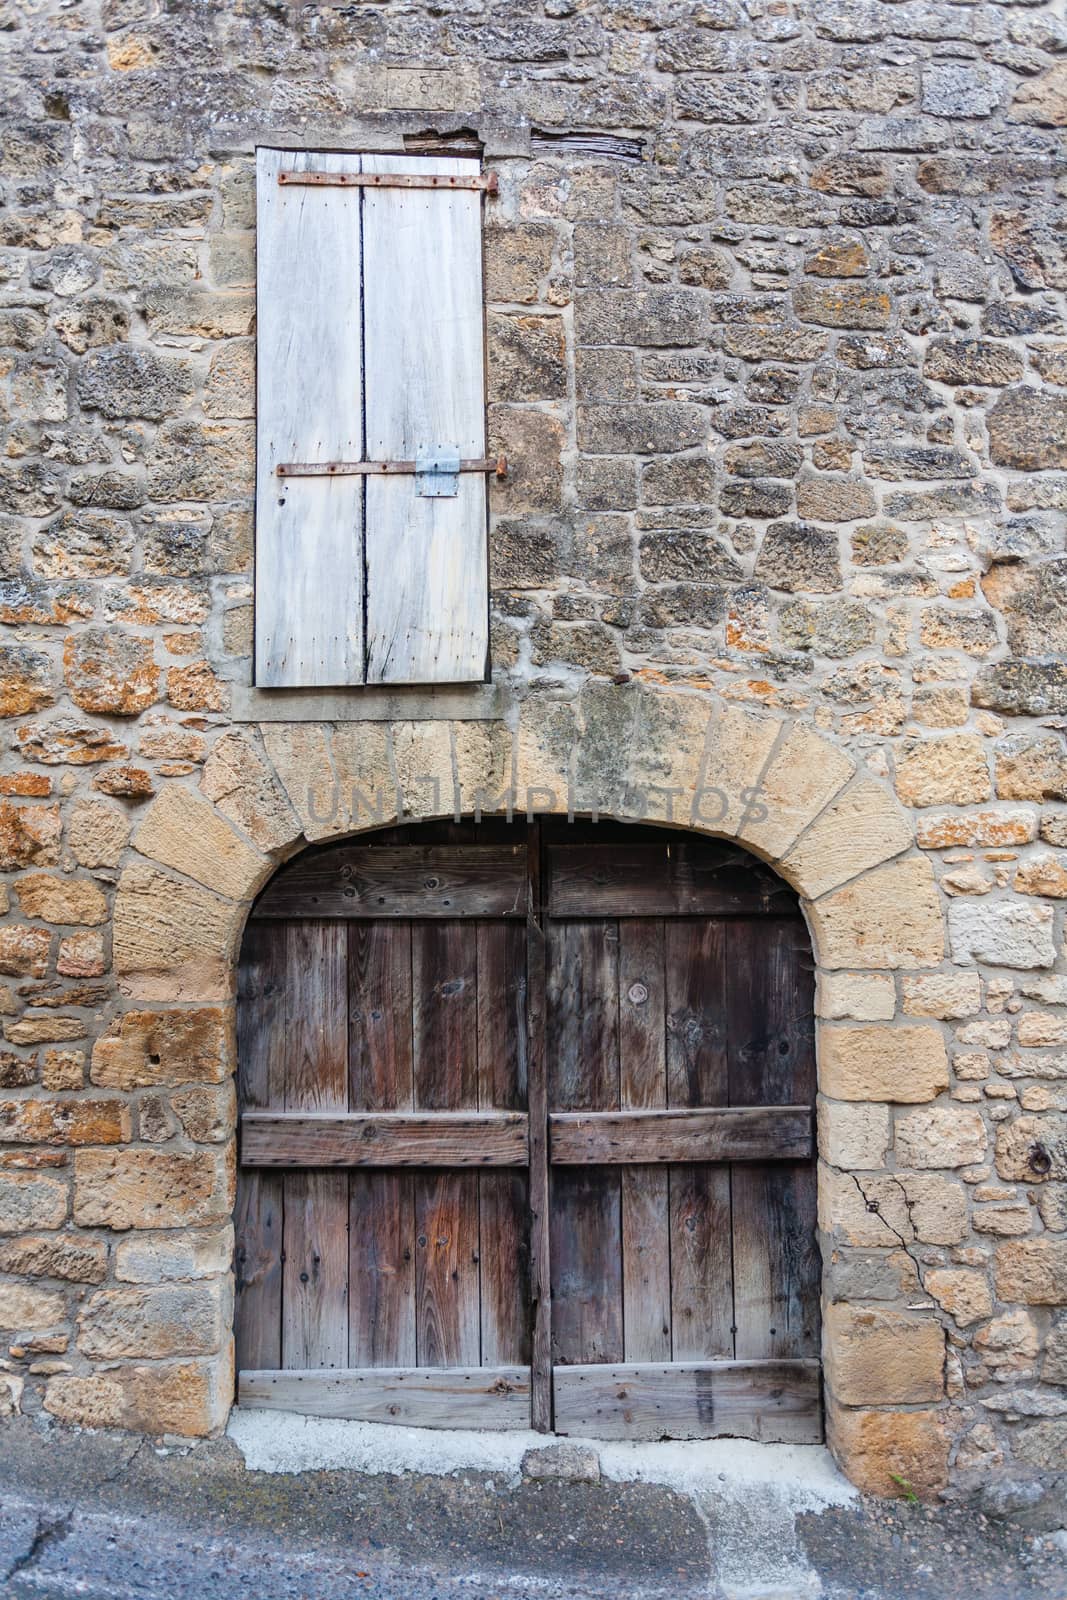 Closeup view of rural door and window in the french region of Dordogne